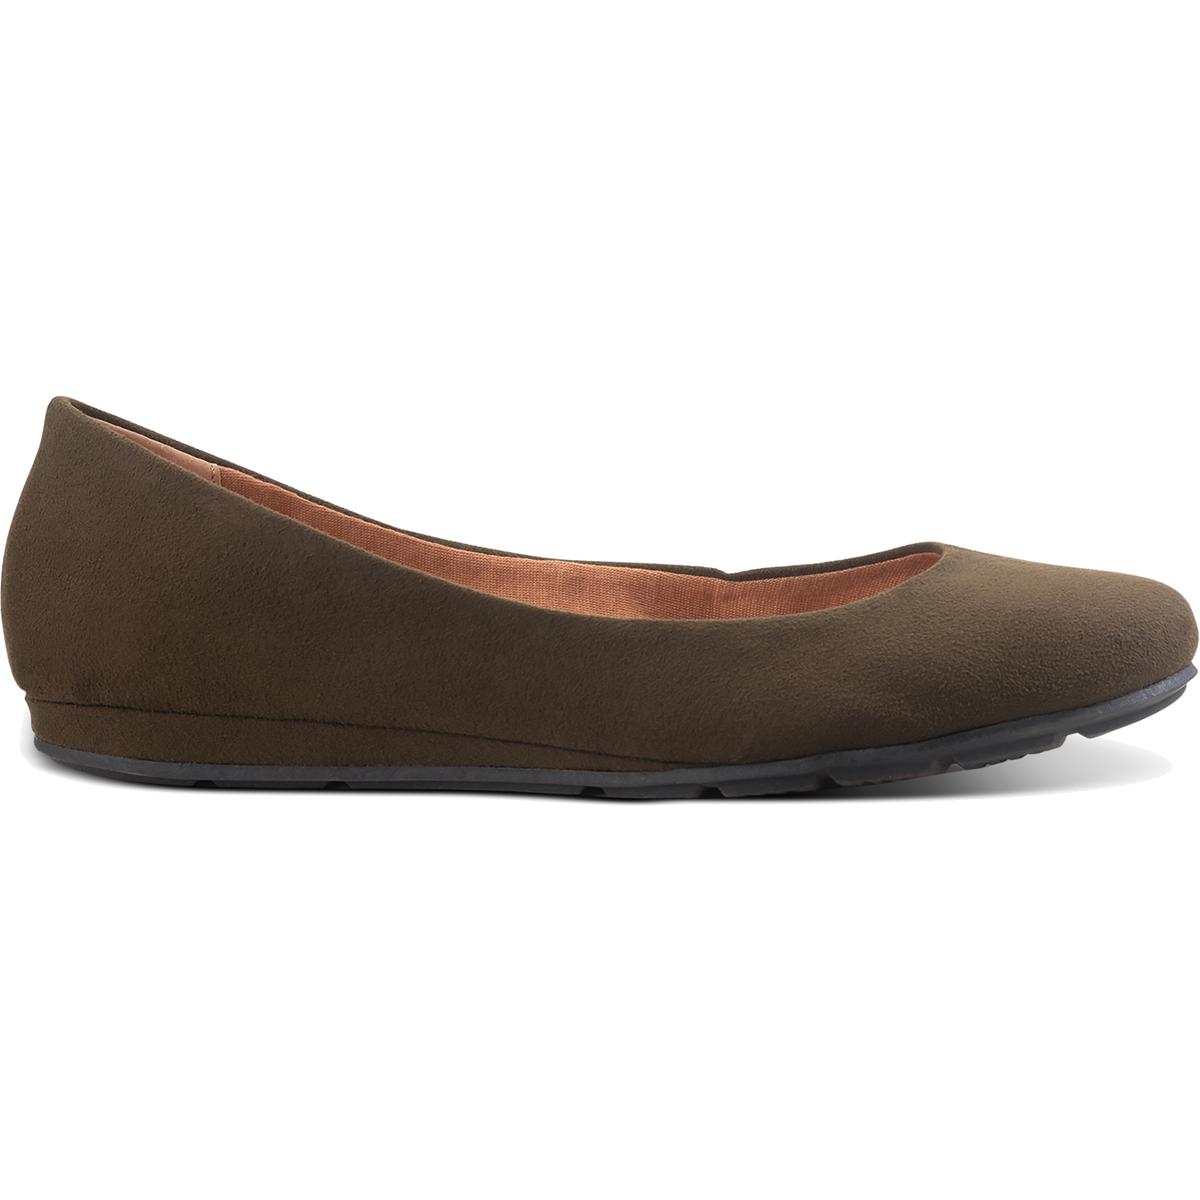 American Rag Womens Ellie Padded Insole Round Toe Flats Shoes BHFO 2803